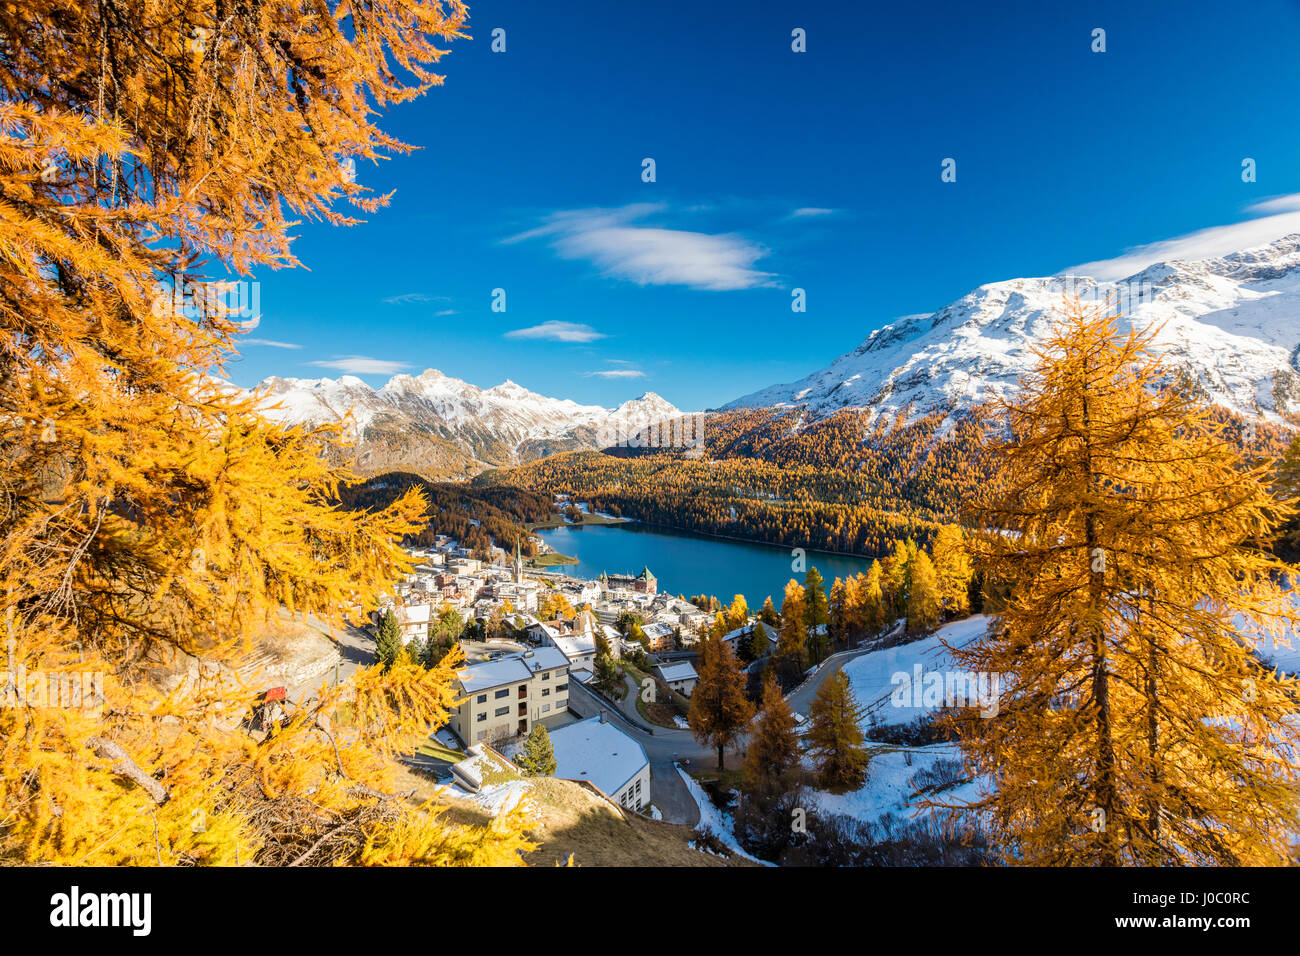 The alpine village of St. Moritz framed by colorful woods and the blue lake, Canton of Graubunden, Engadine, Switzerland Stock Photo